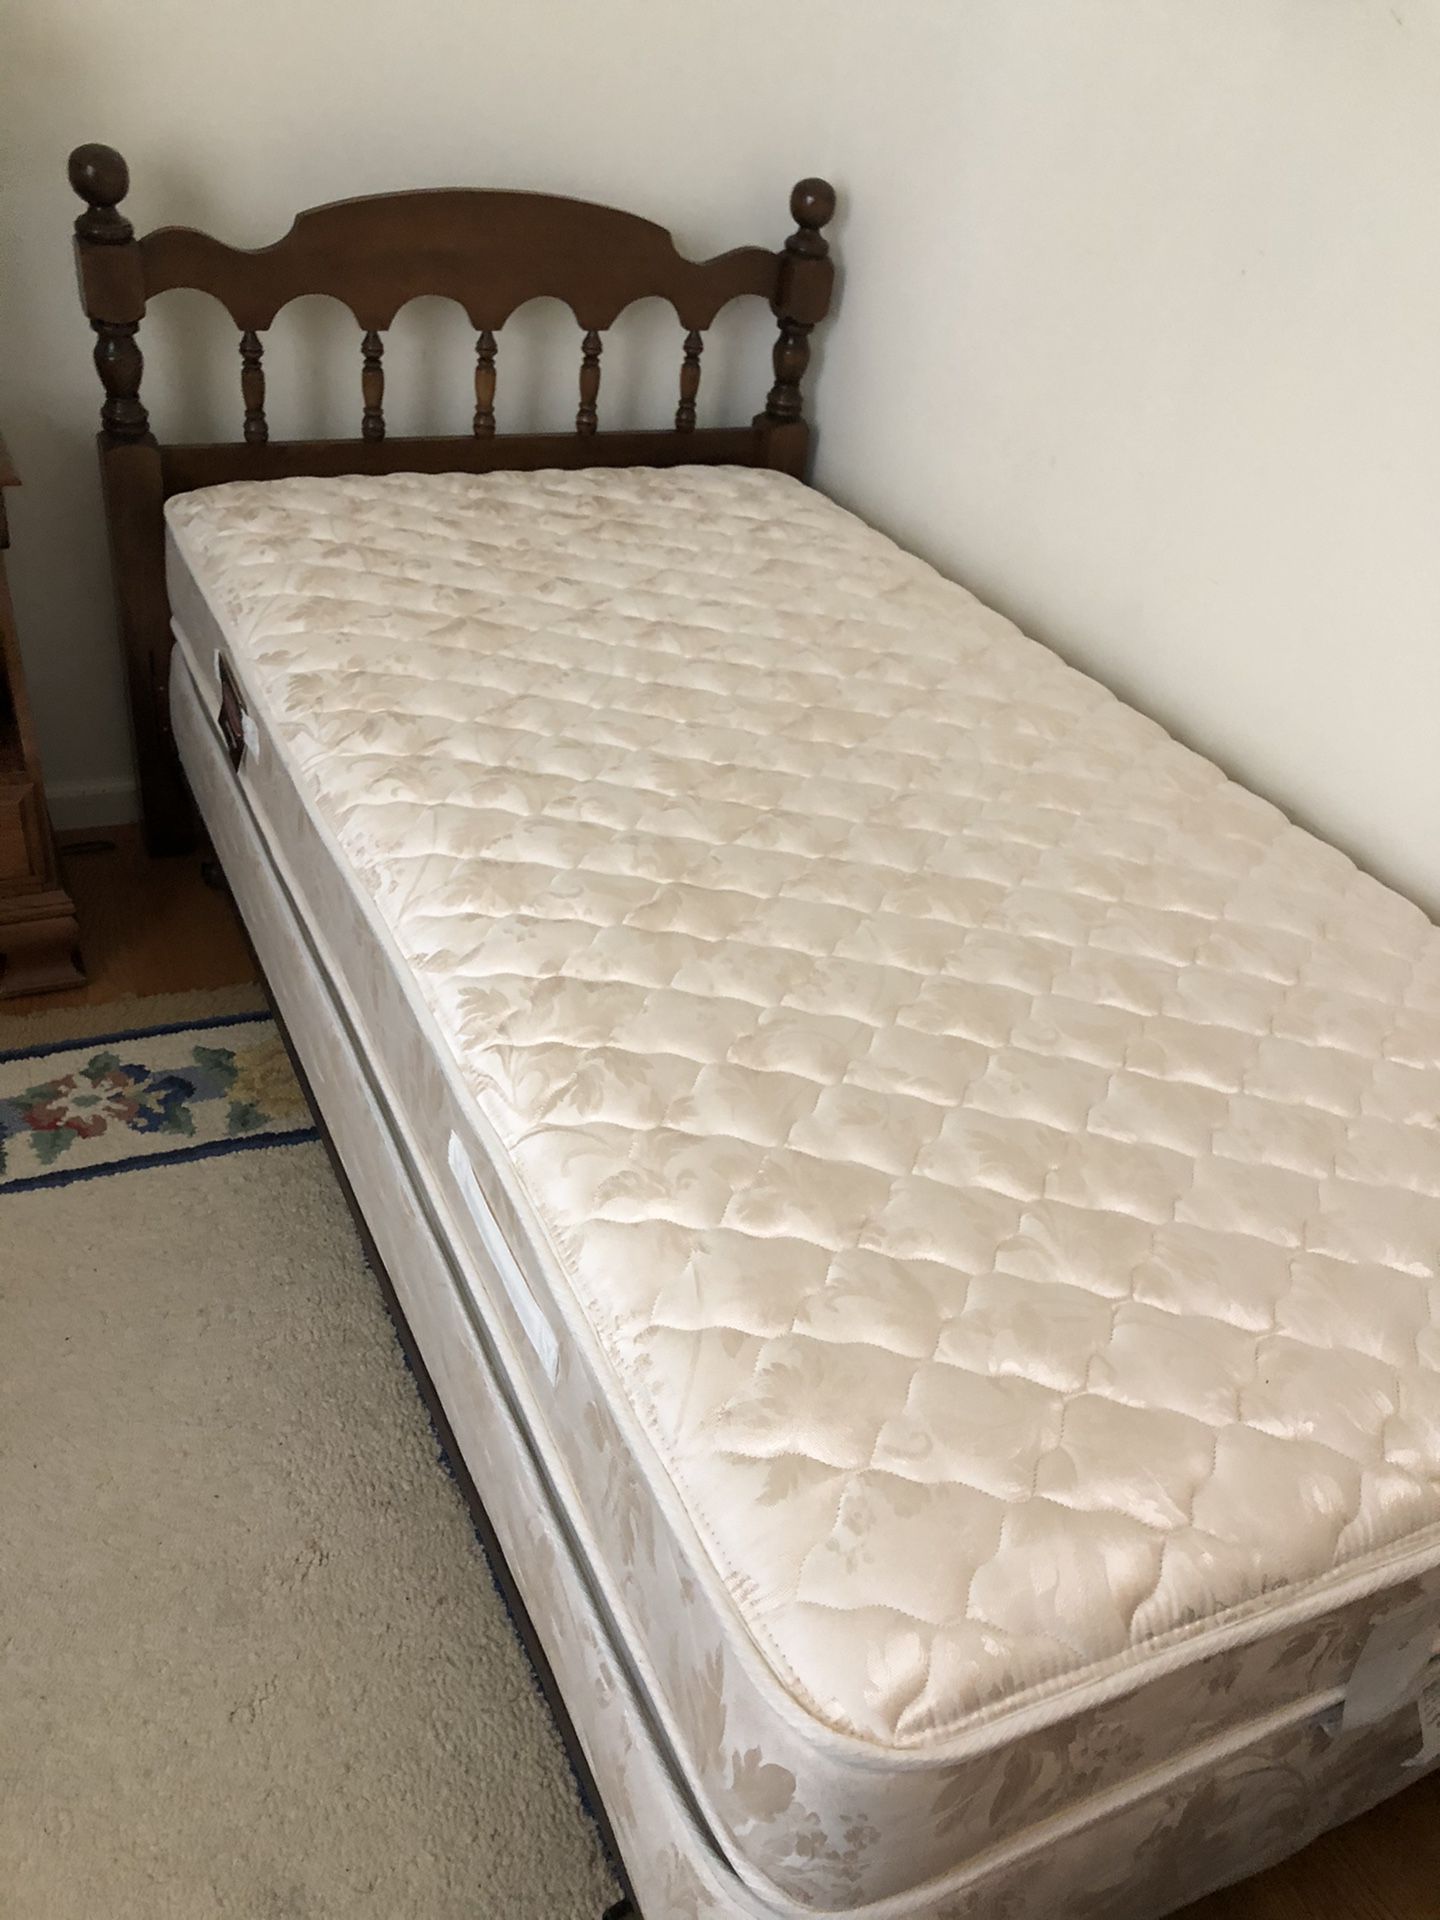 TWIN BED MATTRESS AND FRAME